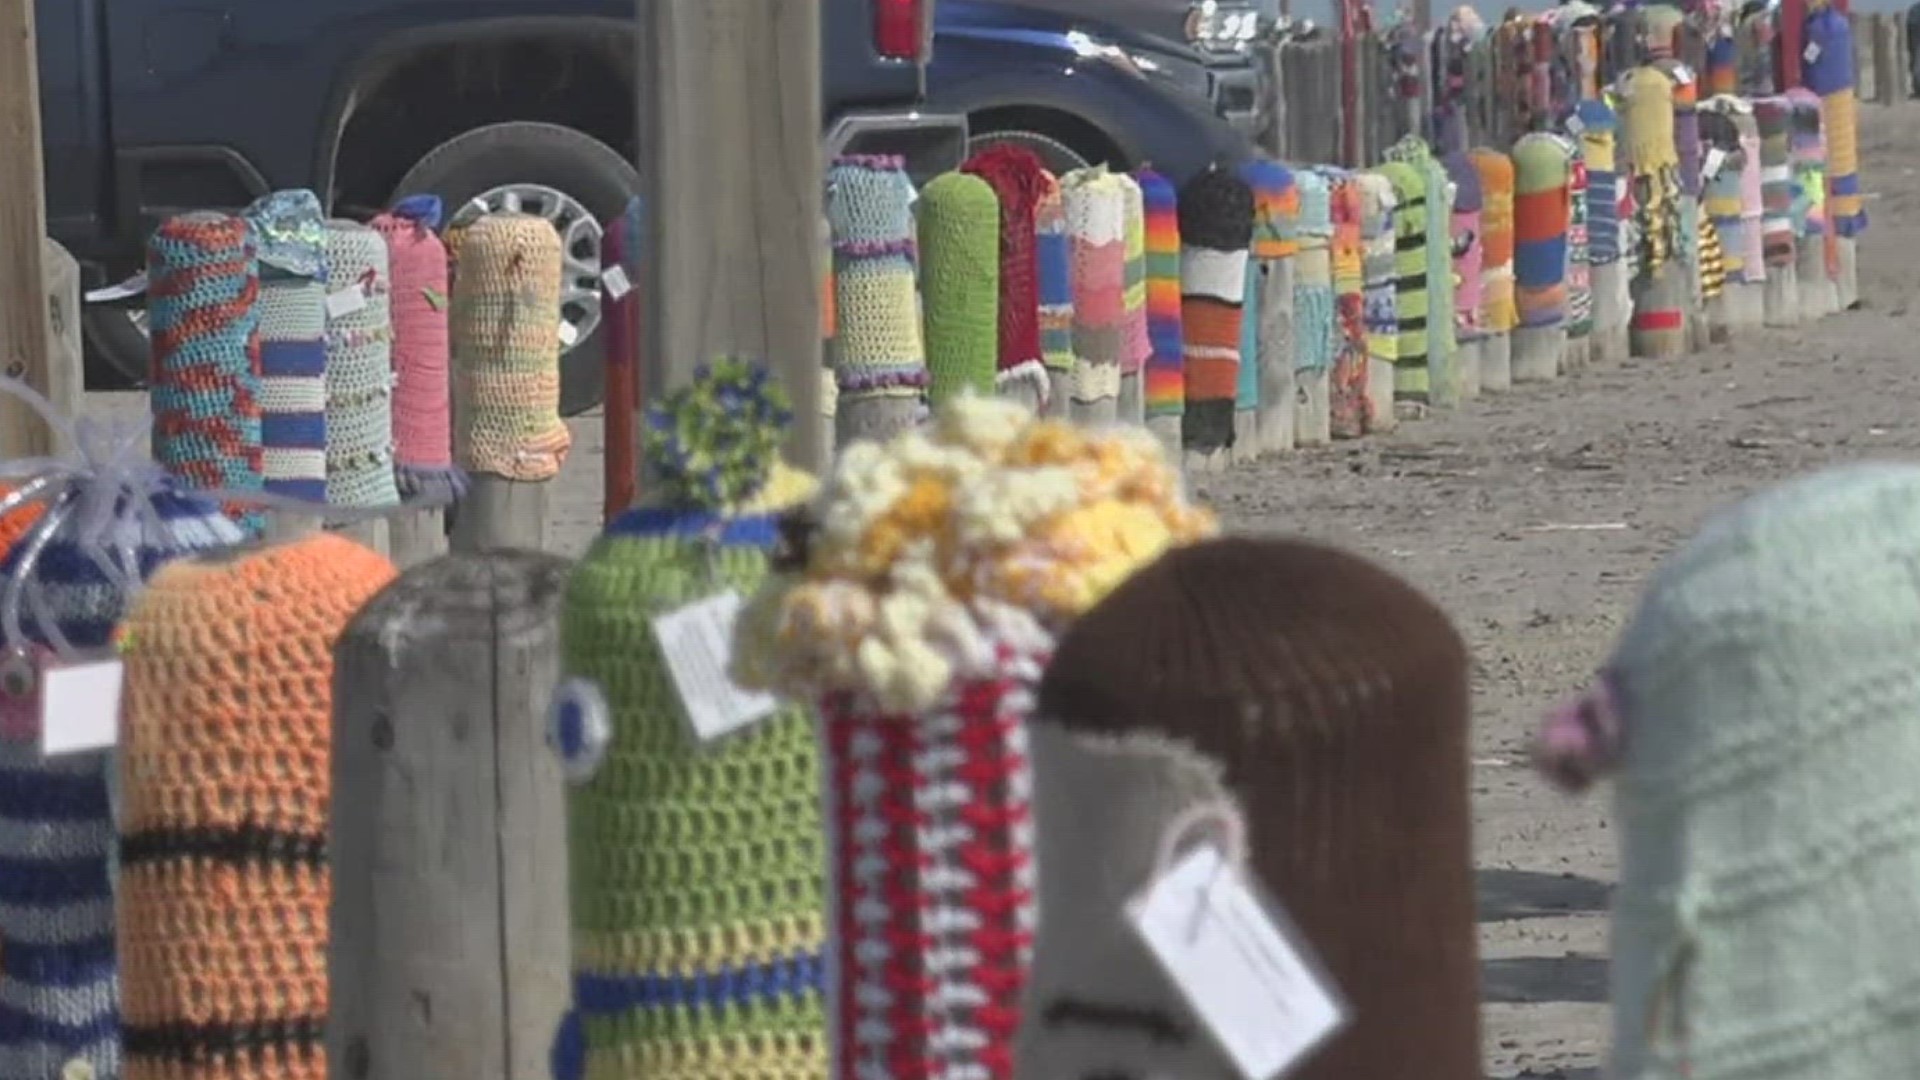 After several Bollard Buddies art pieces were stollen about a year ago, the project now boasts more than 400 unique yarn pieces along the Port Aransas shore.